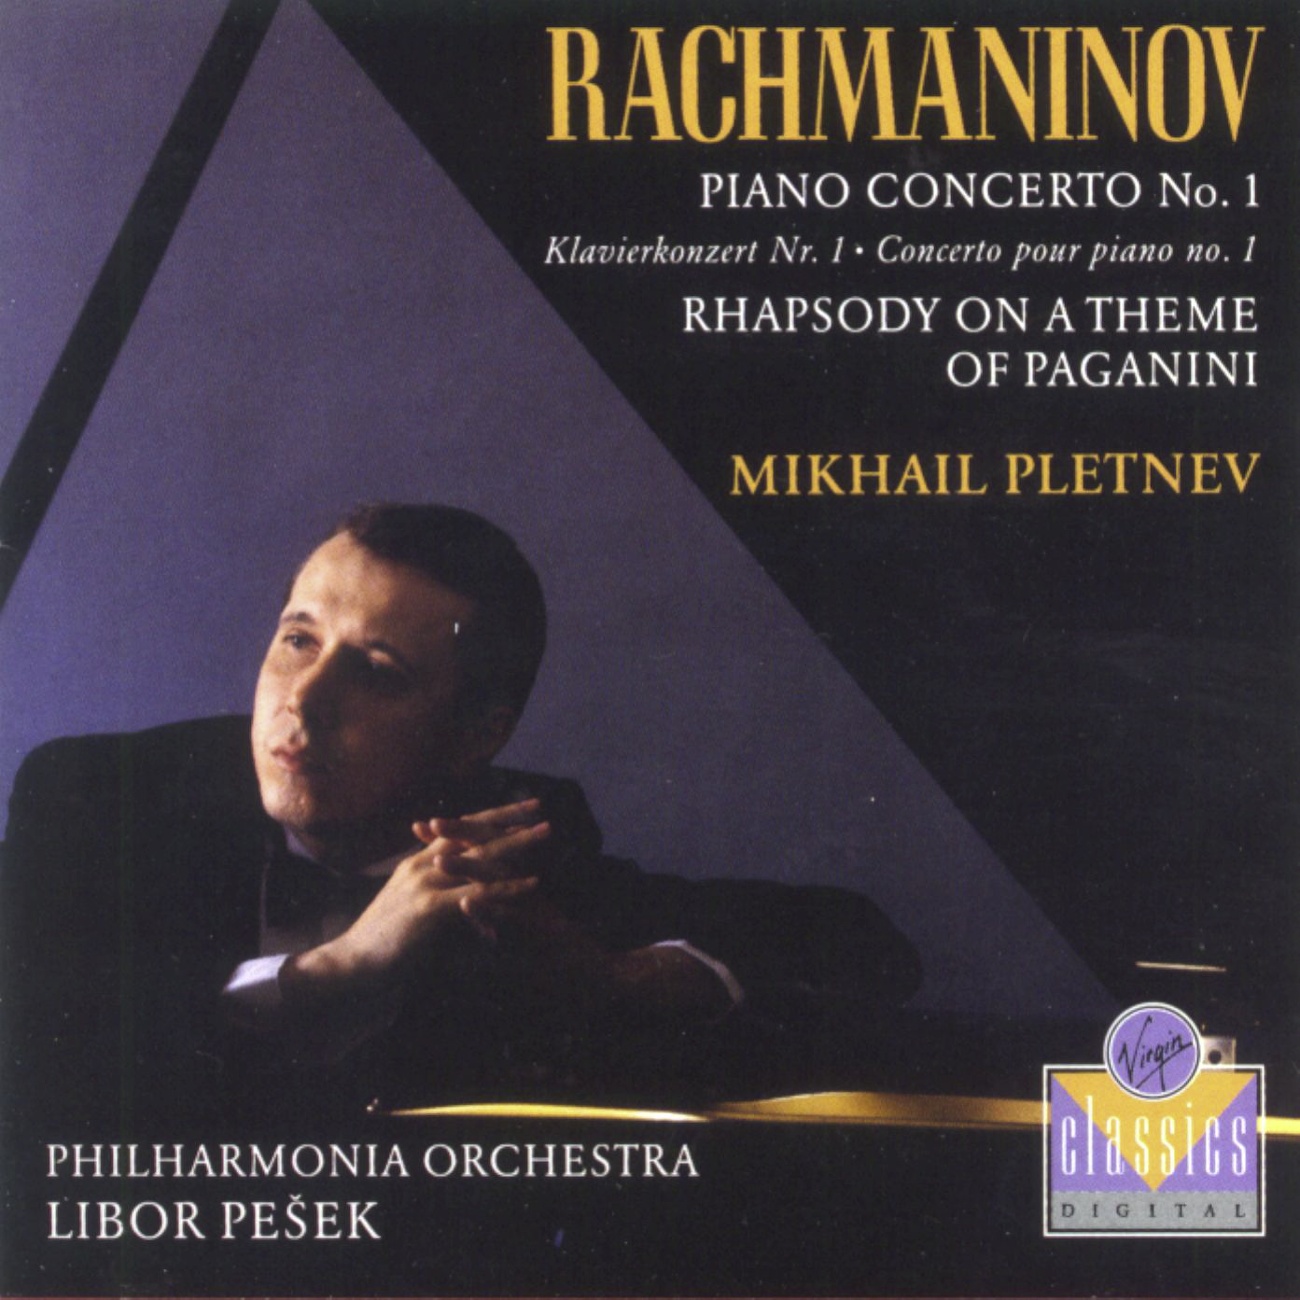 Rhapsody on a Theme of Paganini: Introduction - Allegro vivace